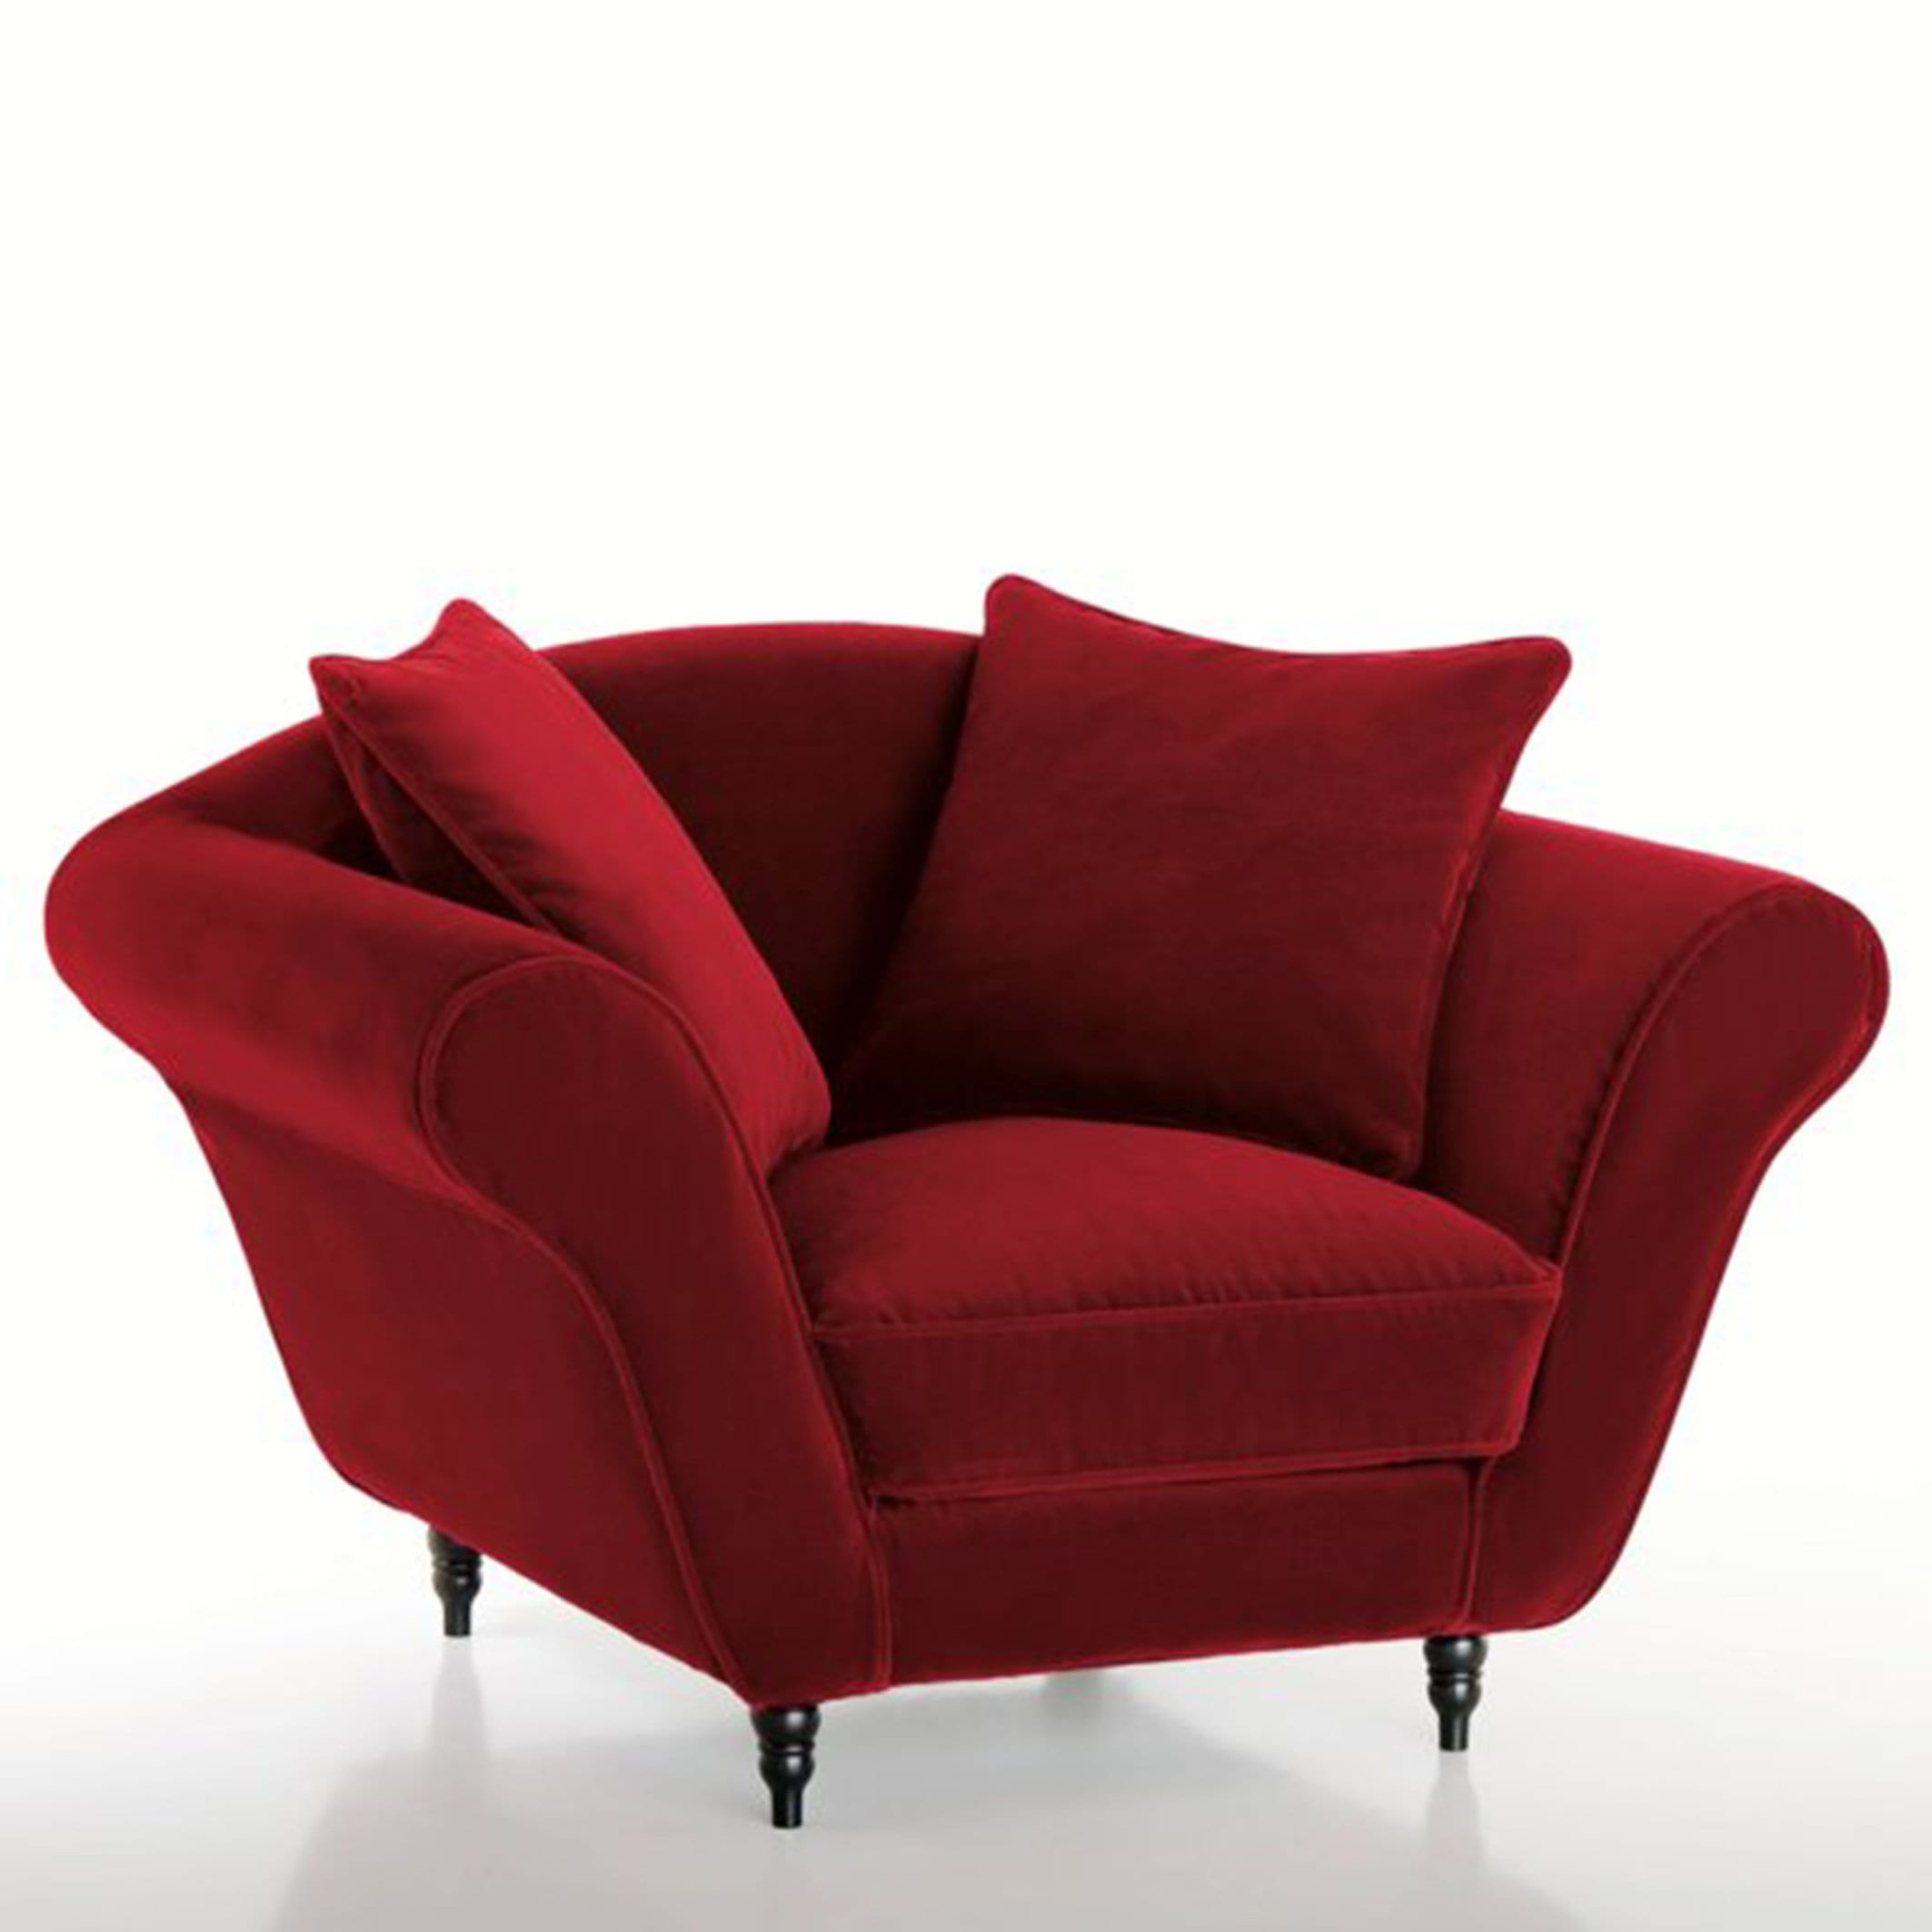 FAUTEUIL_GBH044_Rouge-min.jpg